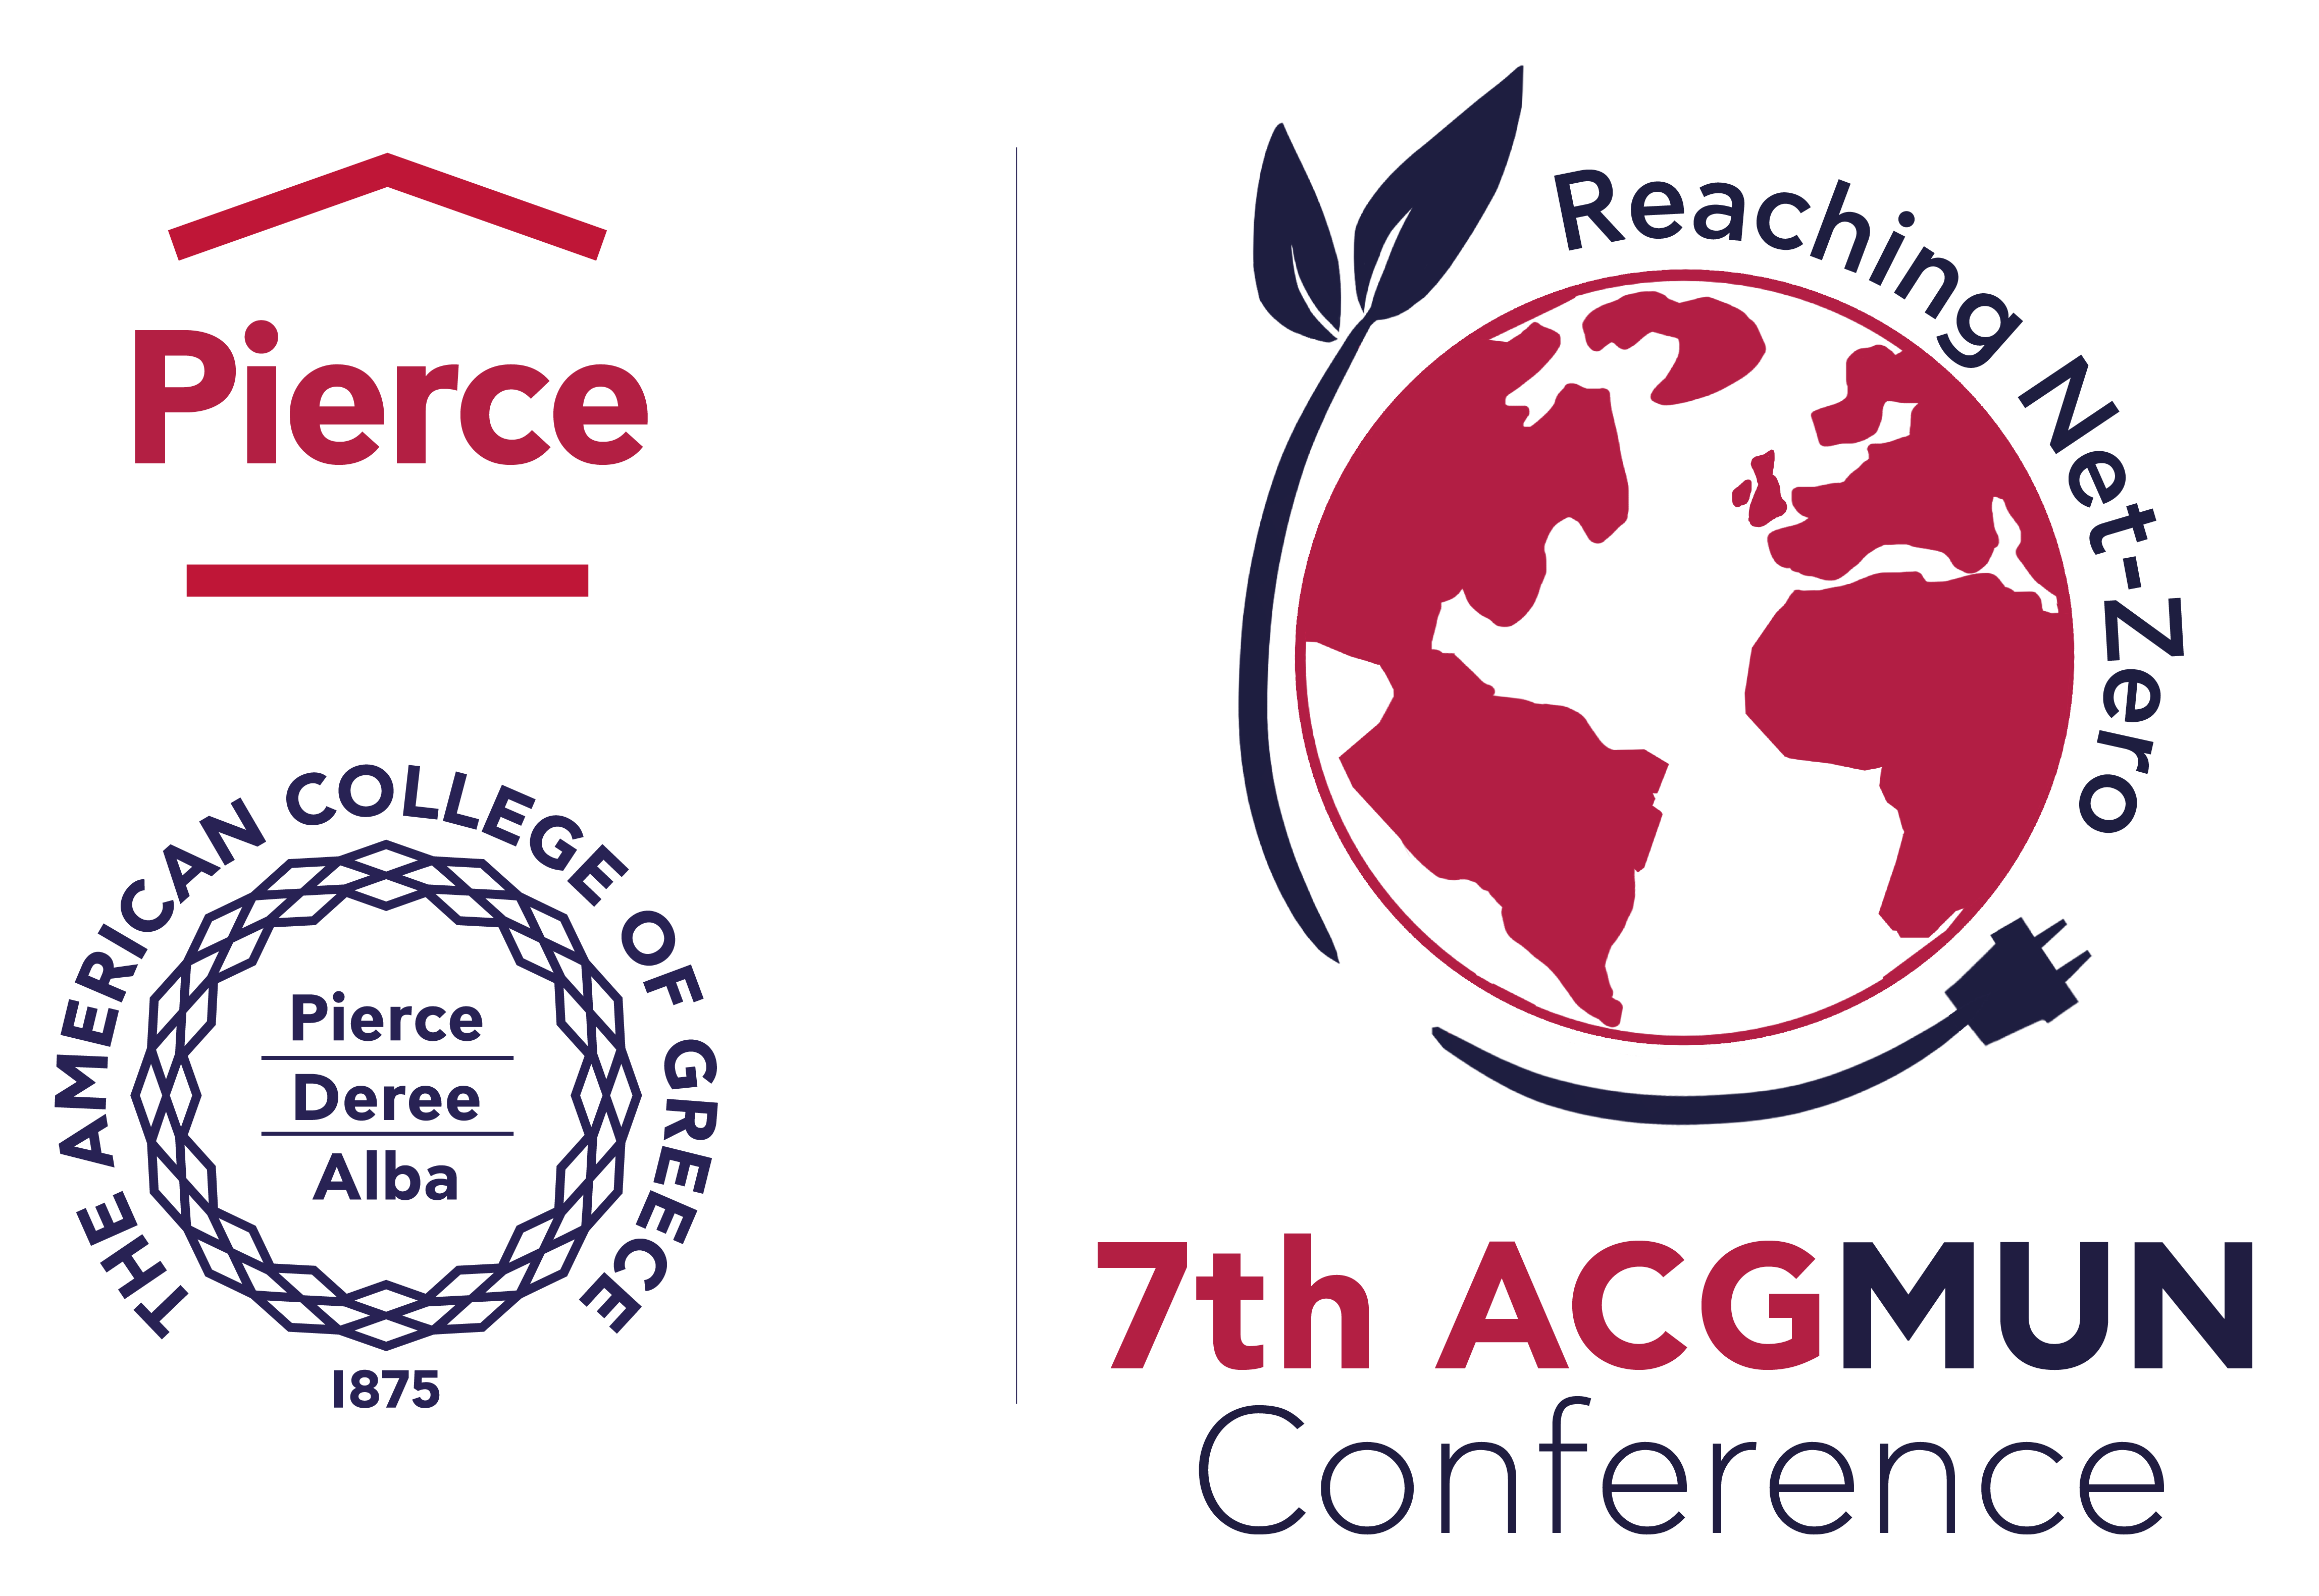 7th ACGMUN Conference